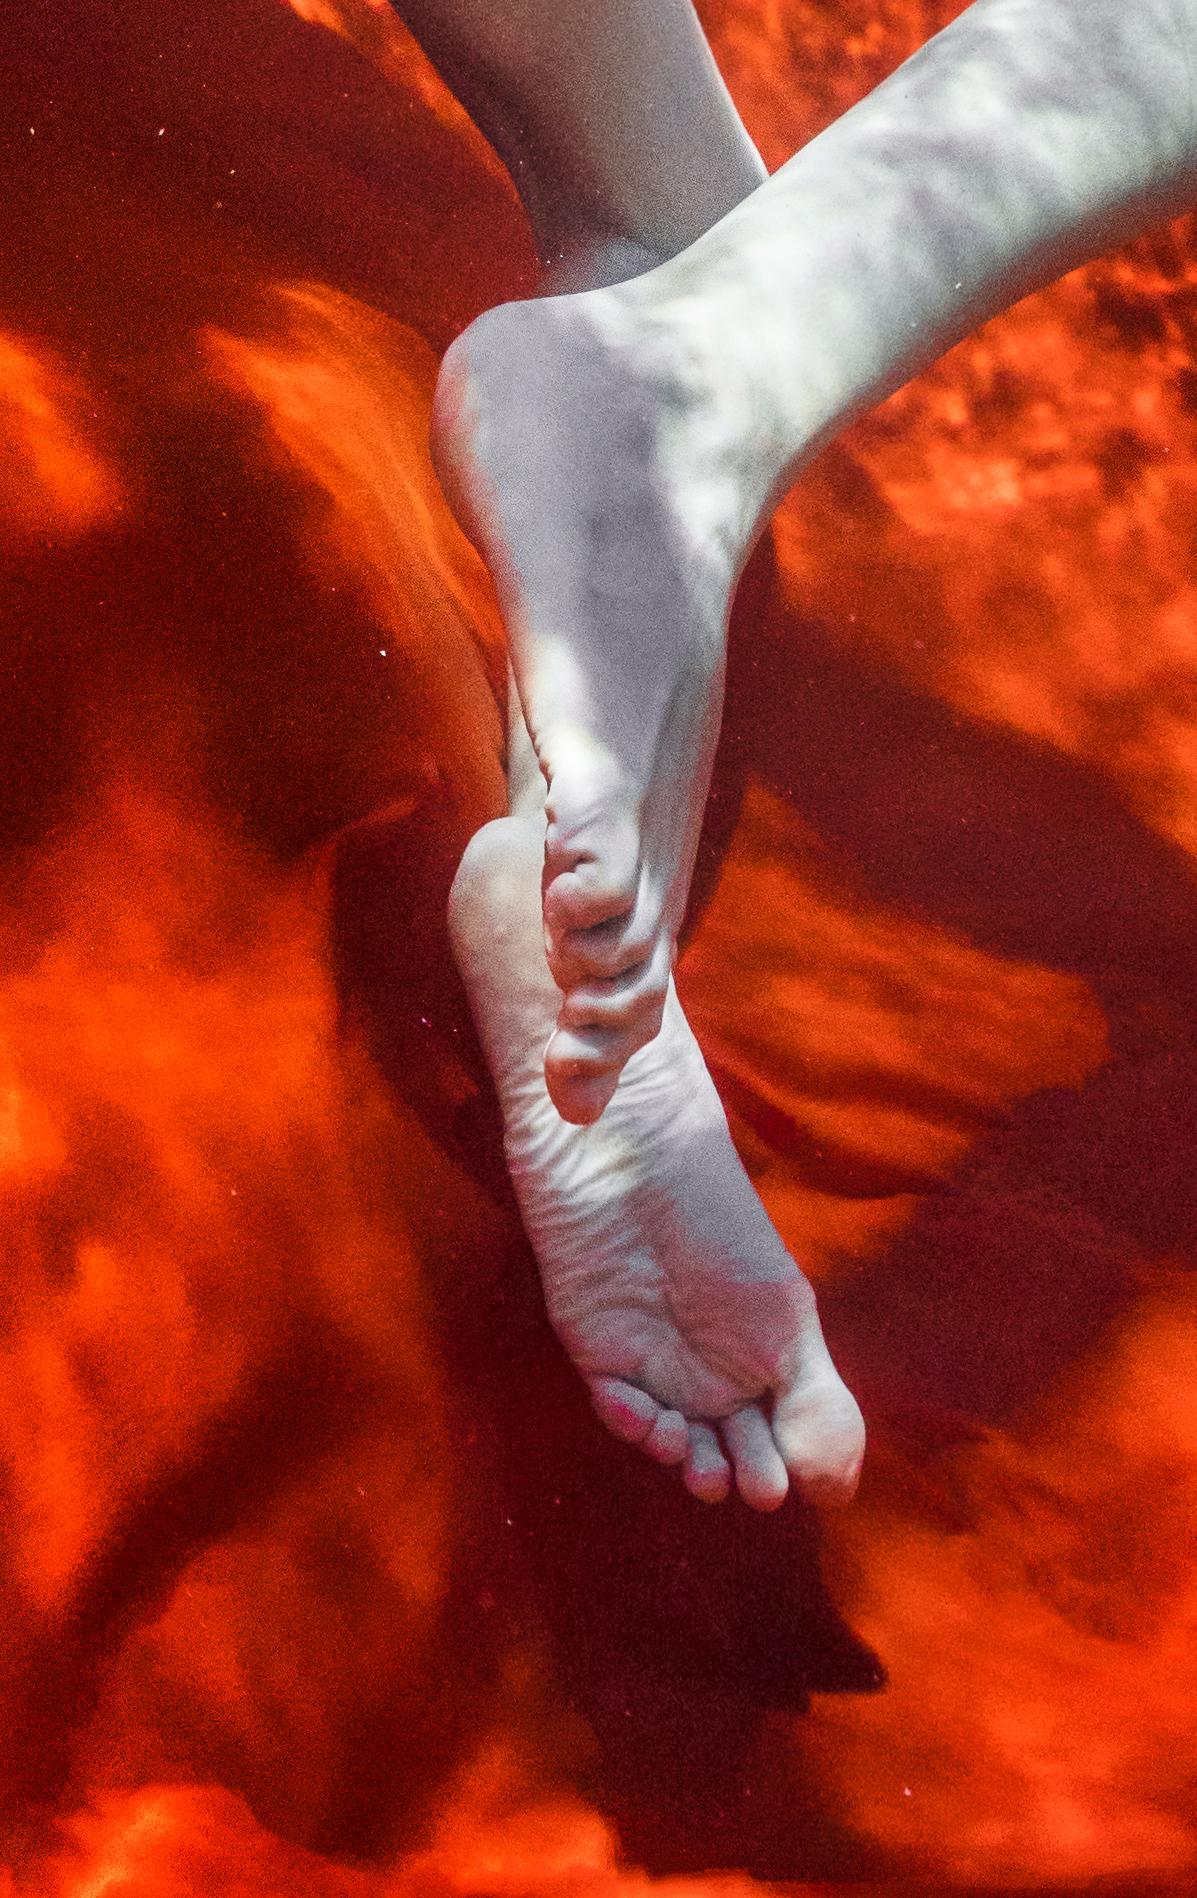 Hot Water - underwater nude photograph - archival pigment print 24